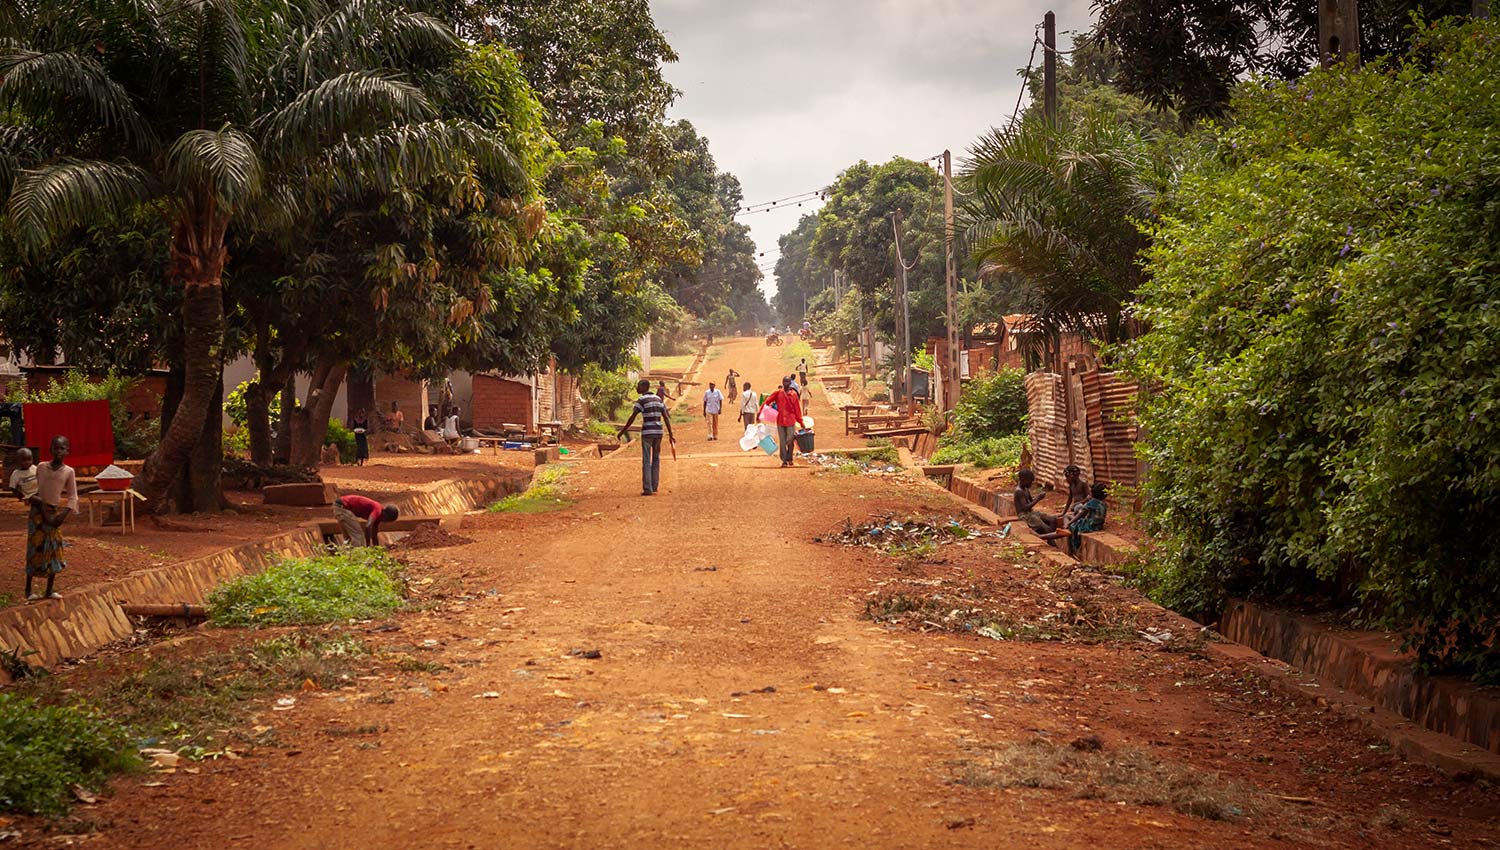 The streets of Bangui, the capital of the Central African Republic